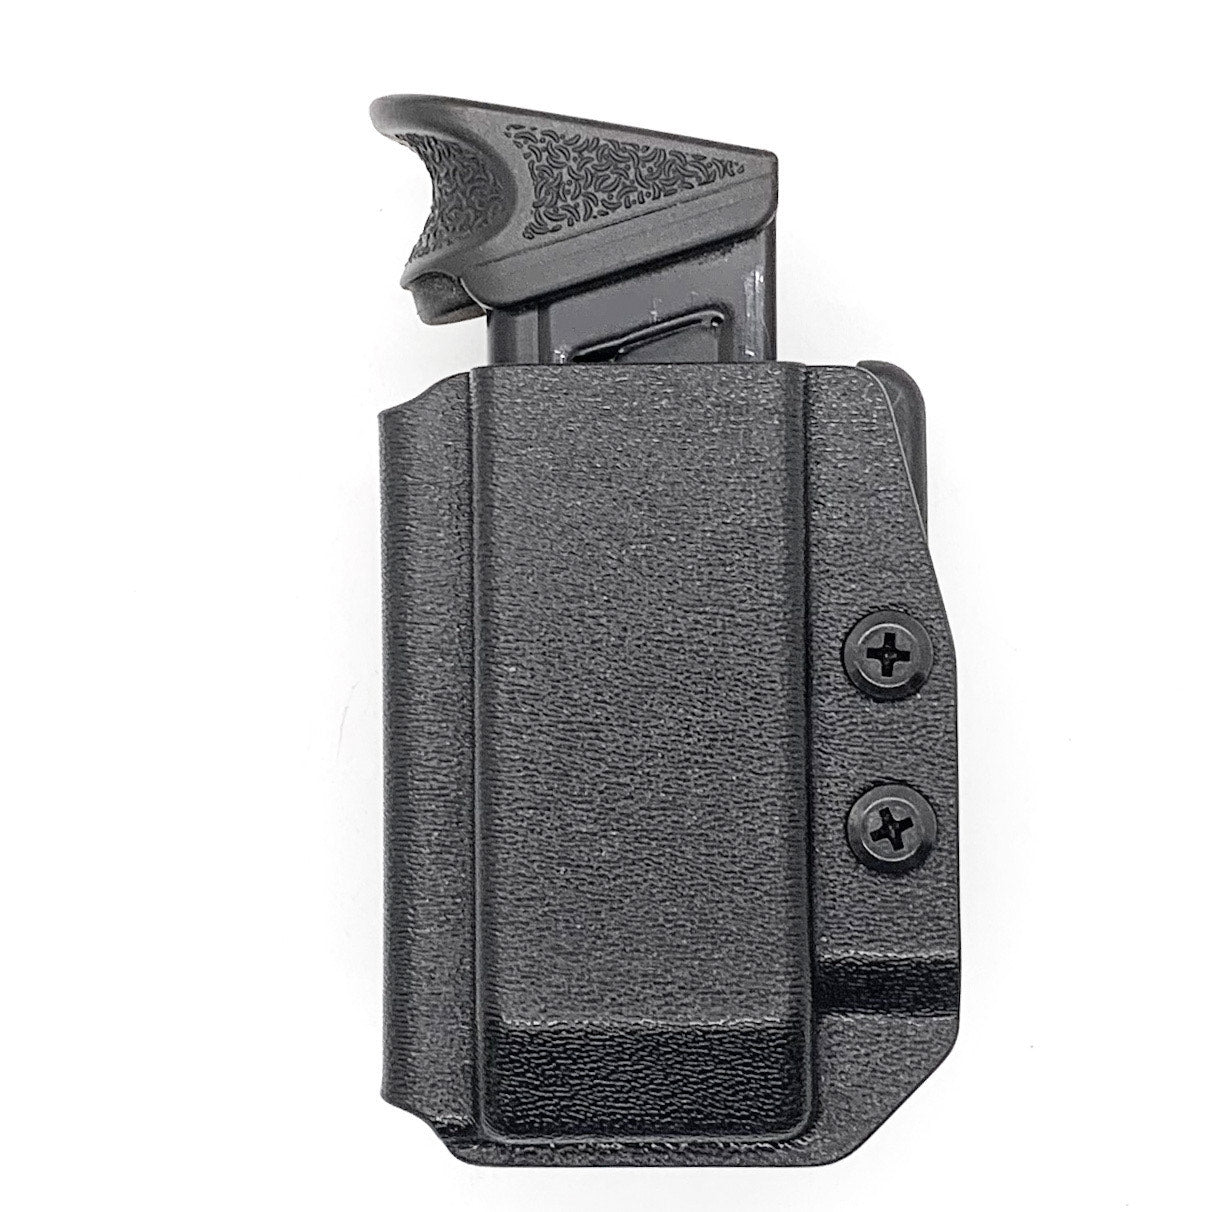 For the best, most comfortable, and rugged Kydex OWB Outside Waistband magazine pouch for H&K 9mm & 40 shop Four Brothers Holsters.  Suitable for belt widths of 1 1/2", 1 3/4". 2" & 2 1/2" Adjustable retention and cant outside waist carrier holster Sig P320, Glock 9mm & 40, H&K, Ruger, Walther, Smith & Wesson, FN